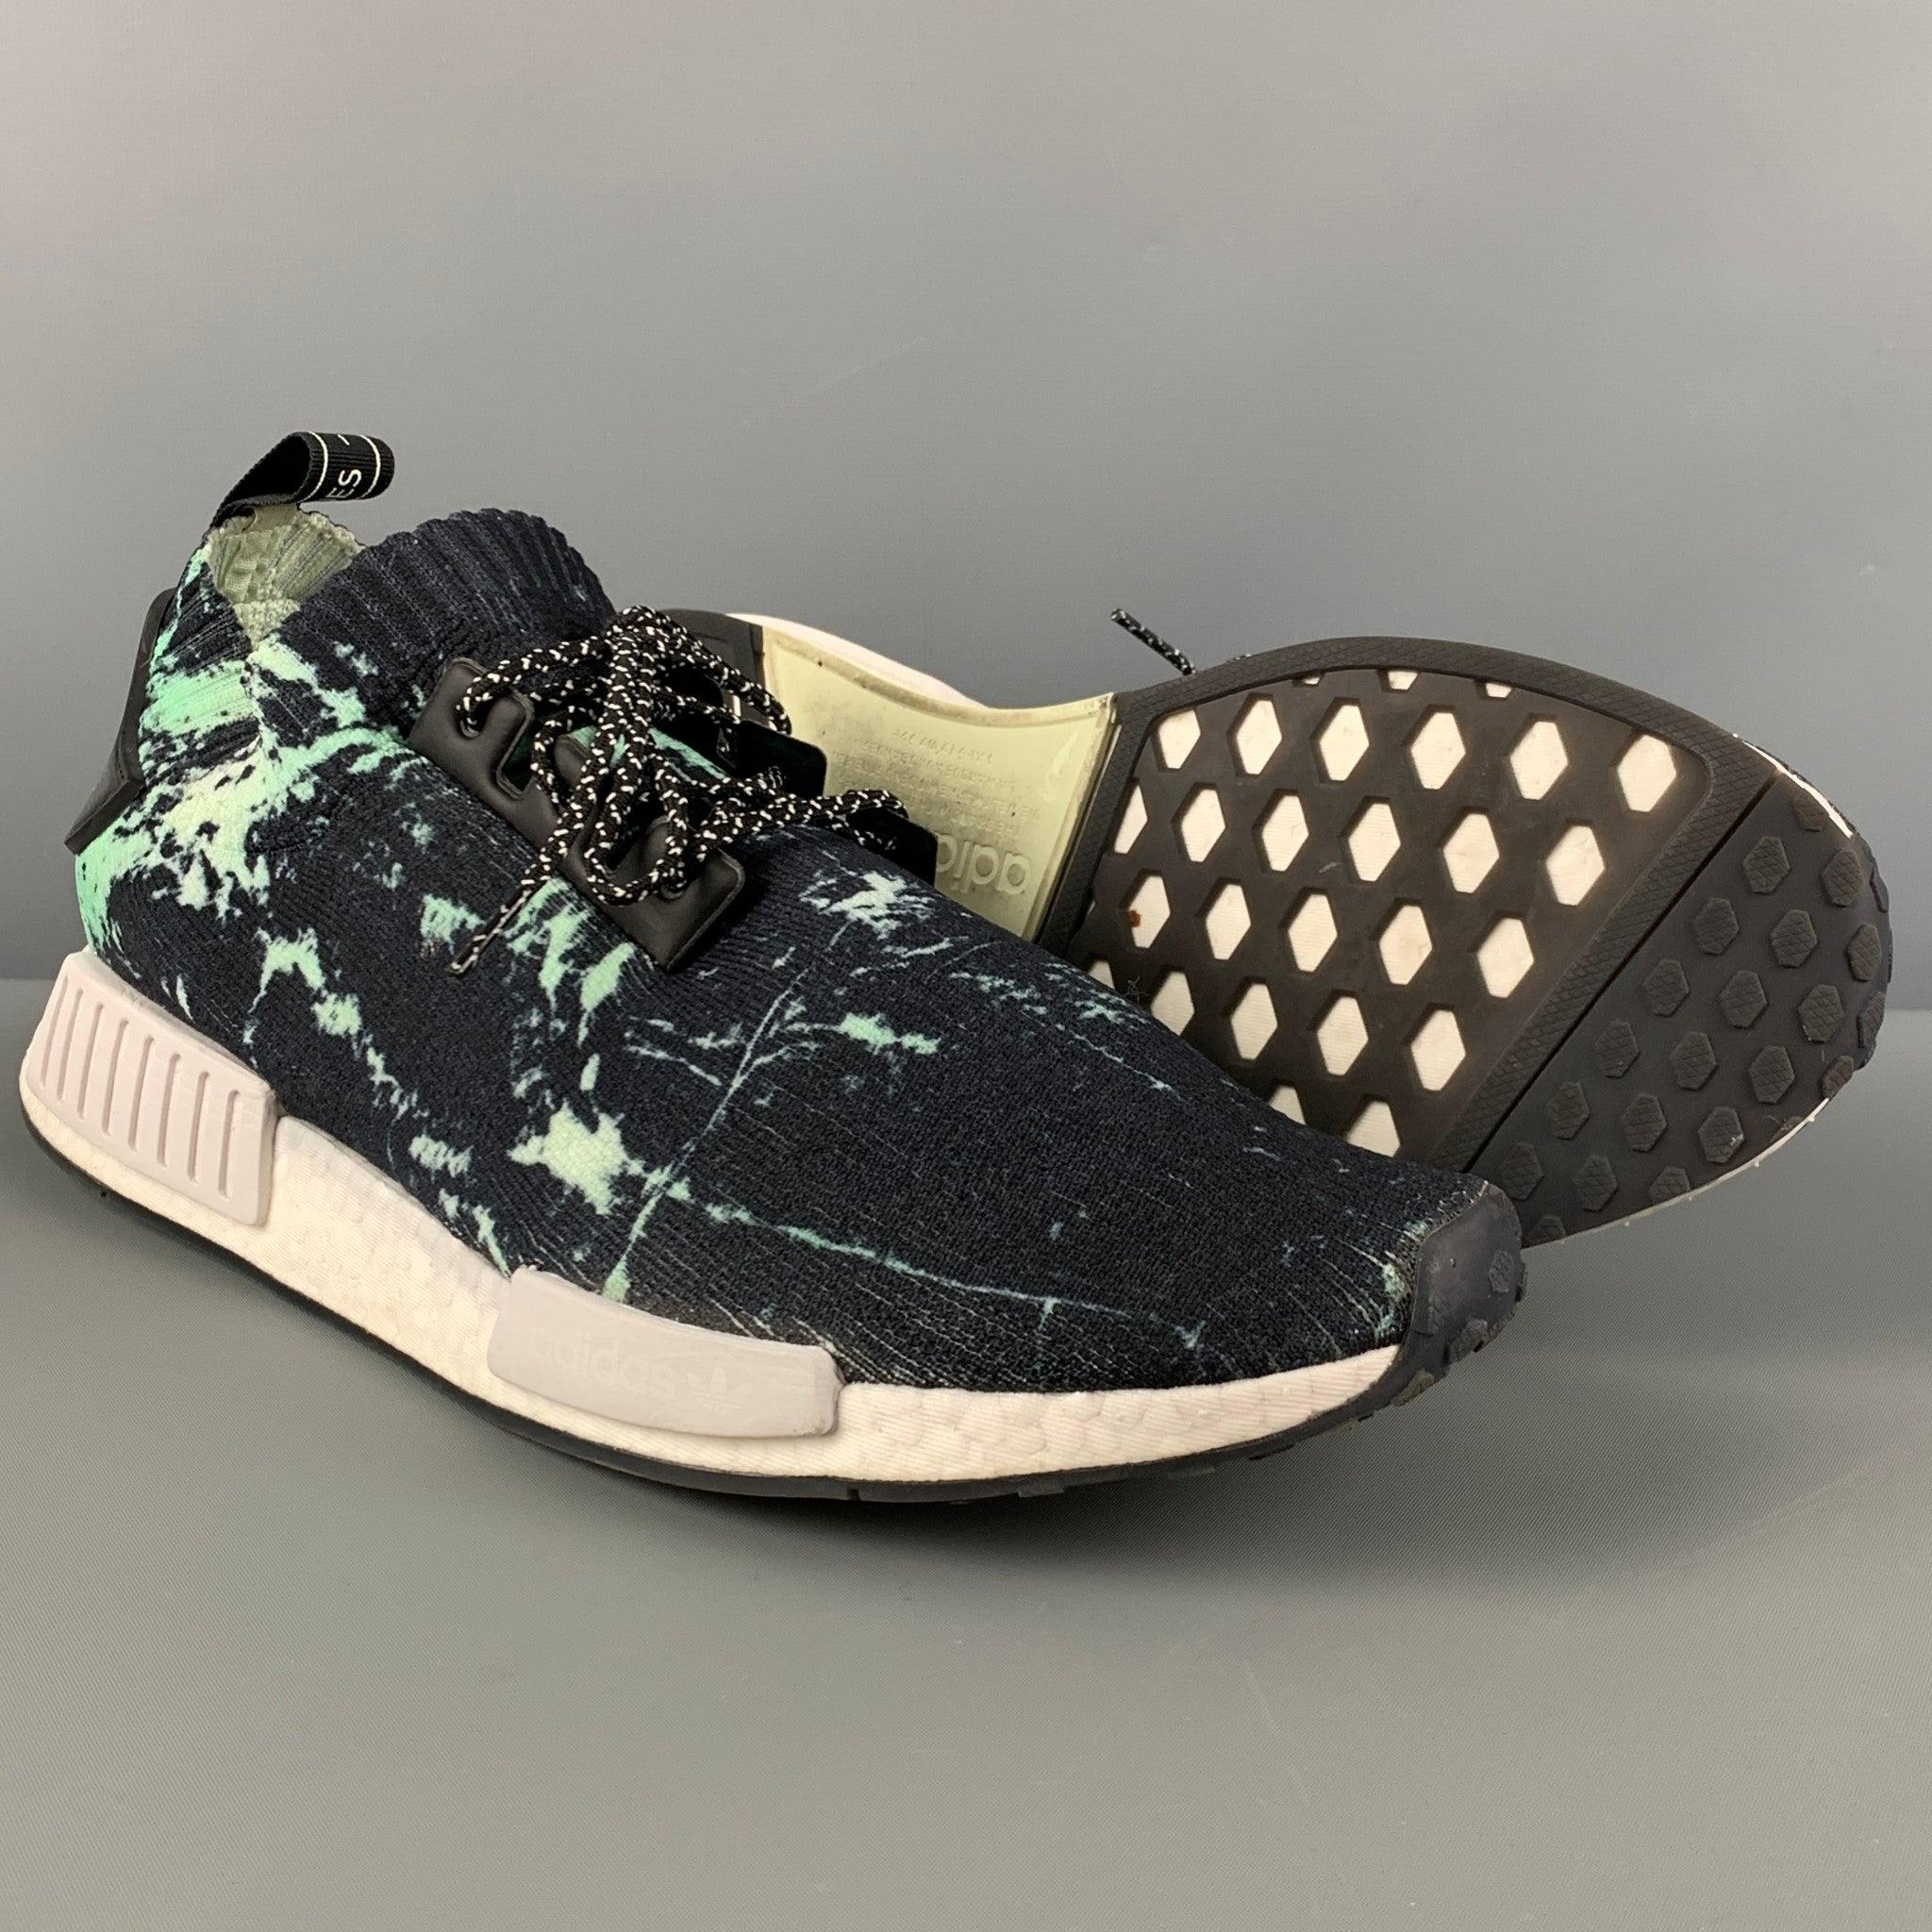 ADIDAS NMD R1 PK Size 12.5 Black Green Splattered Nylon Lace Up Sneakers In Good Condition For Sale In San Francisco, CA